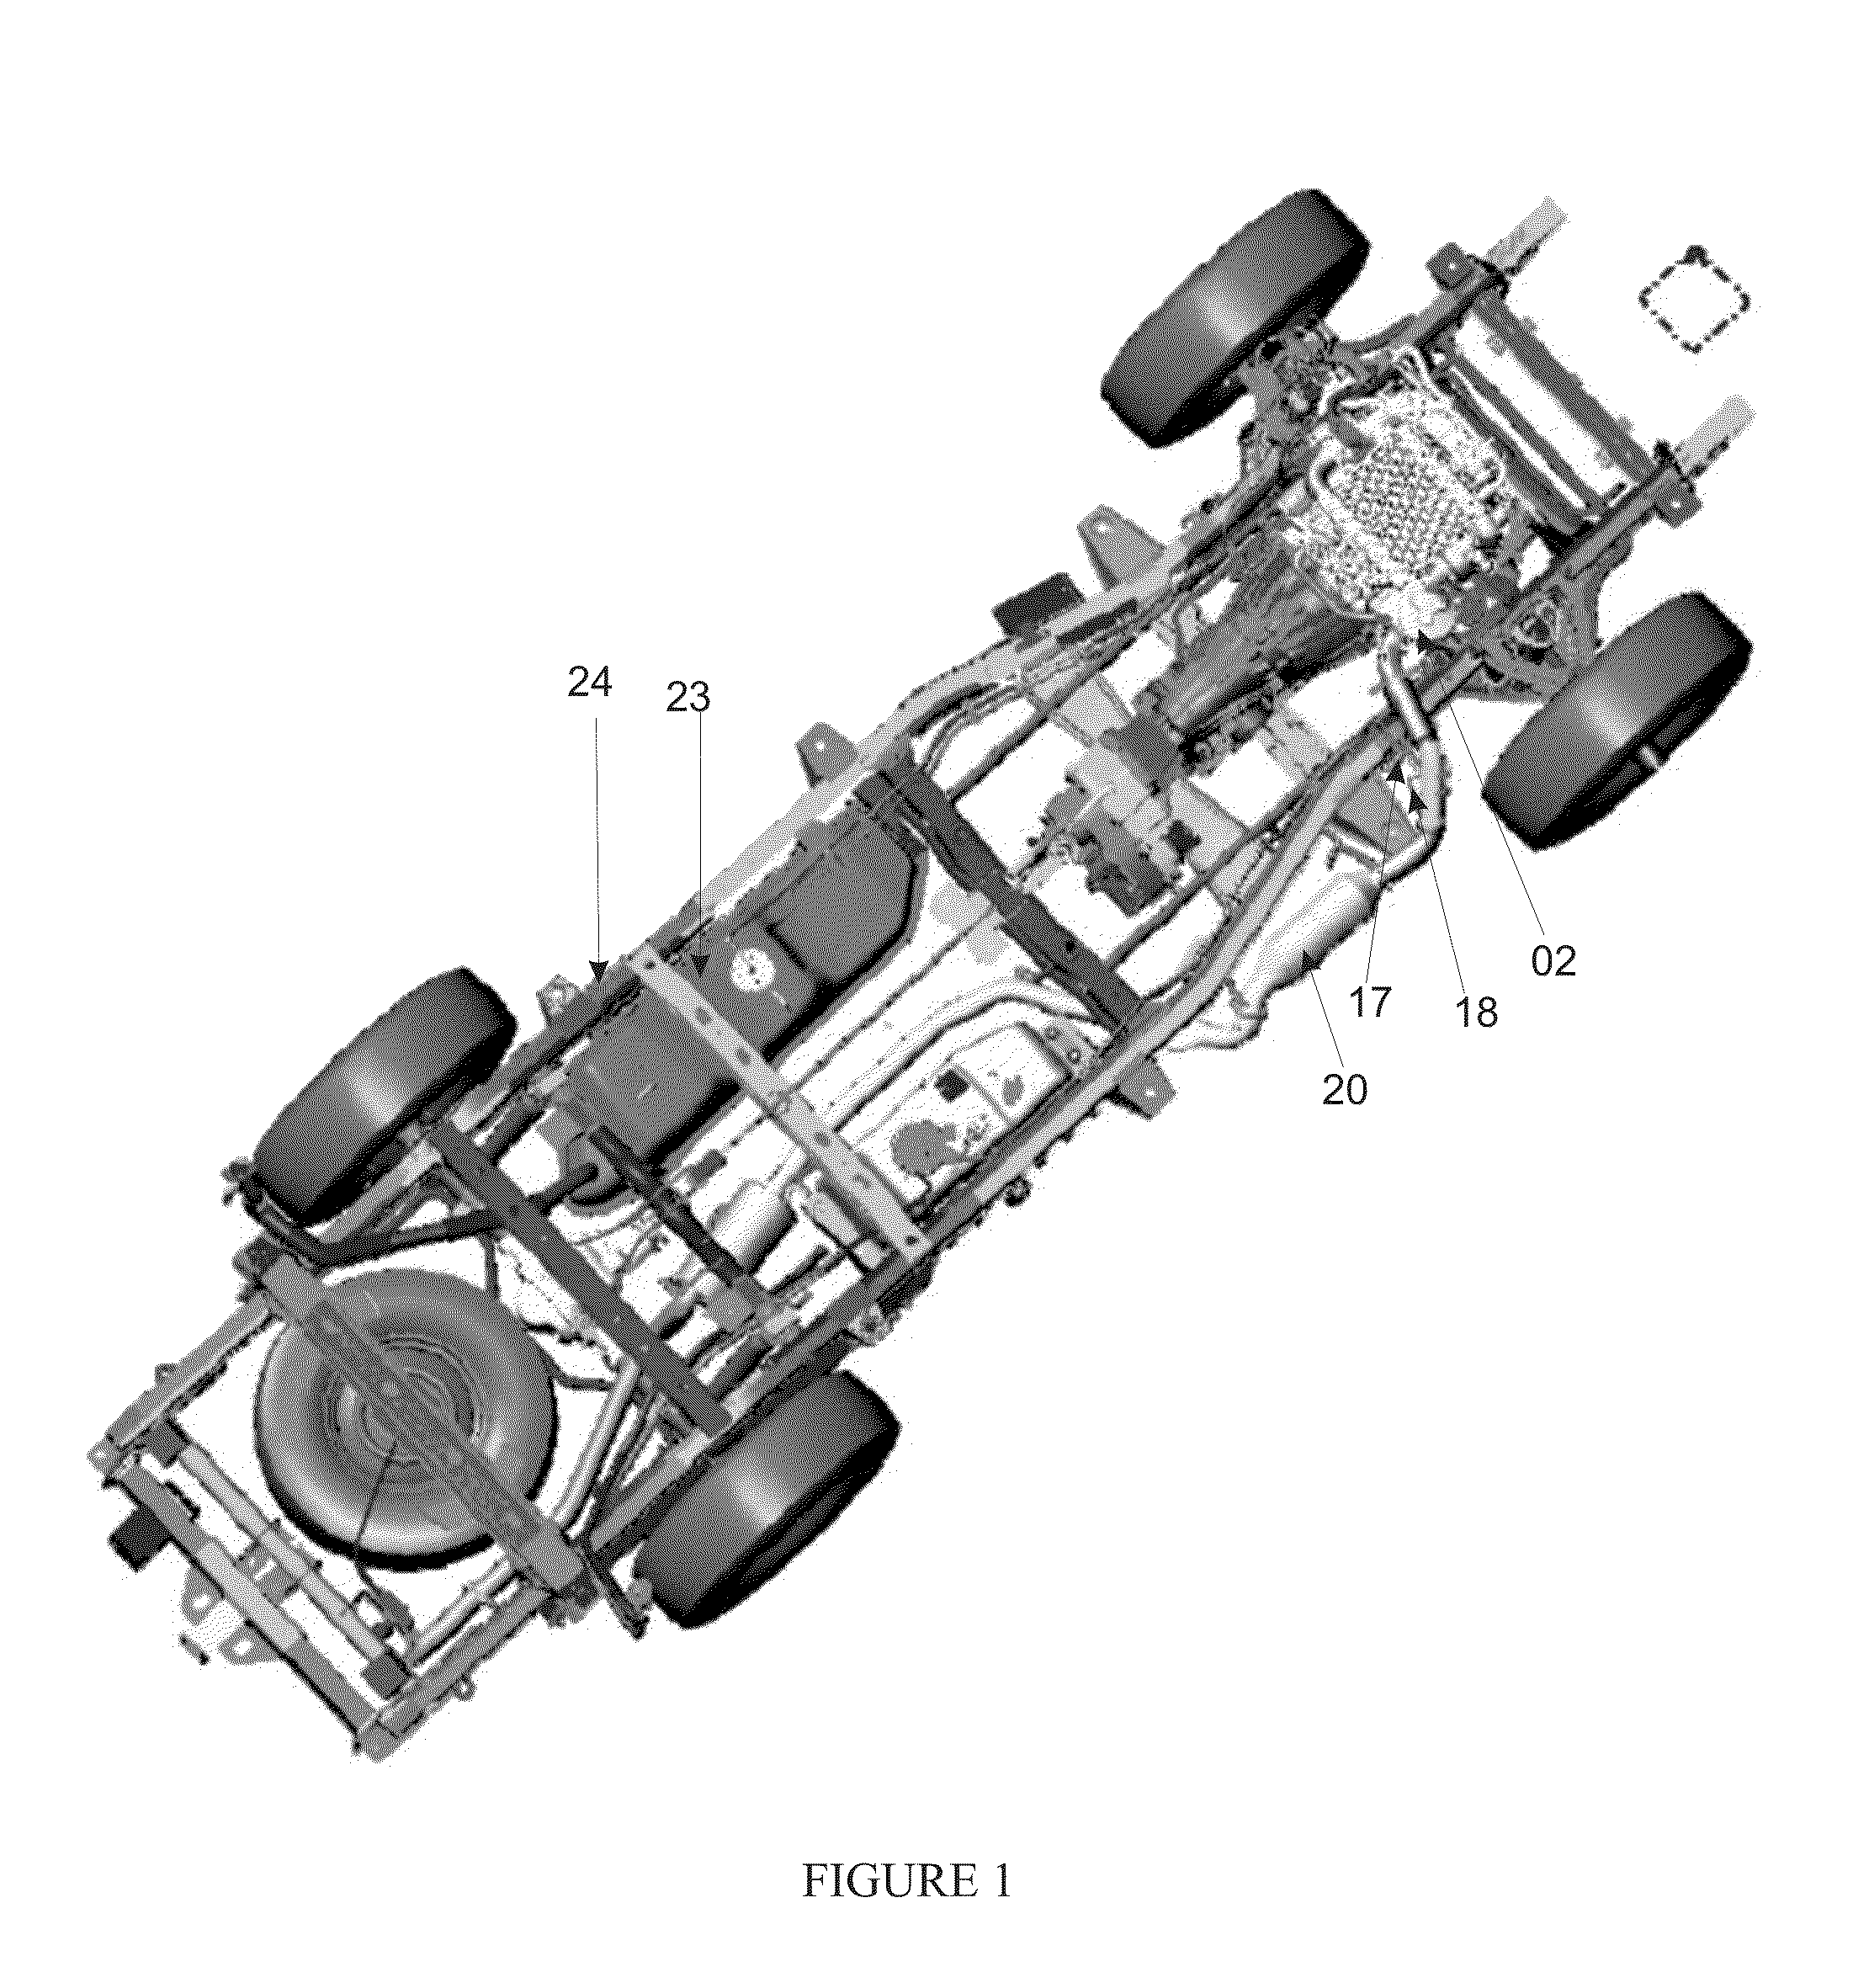 Integrated Exhaust Gas After-Treatment System for Diesel Fuel Engines